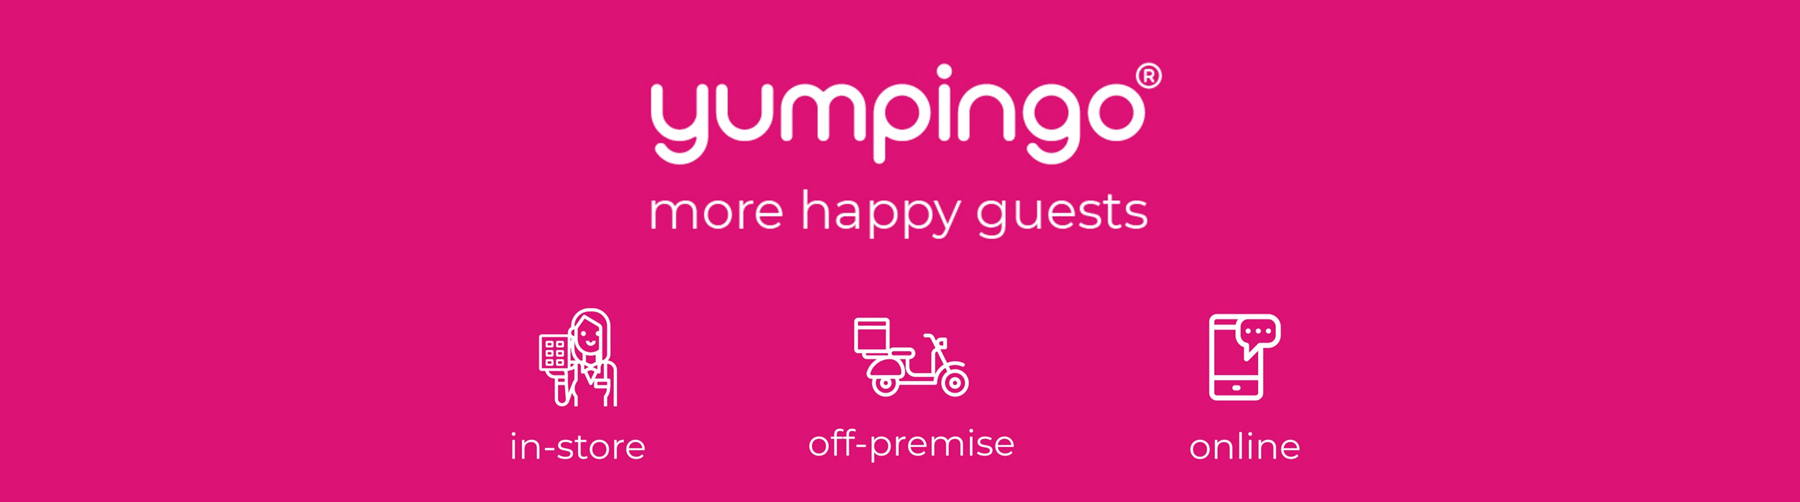 Yumpingo – more happy guests – in-store, off-premise, online